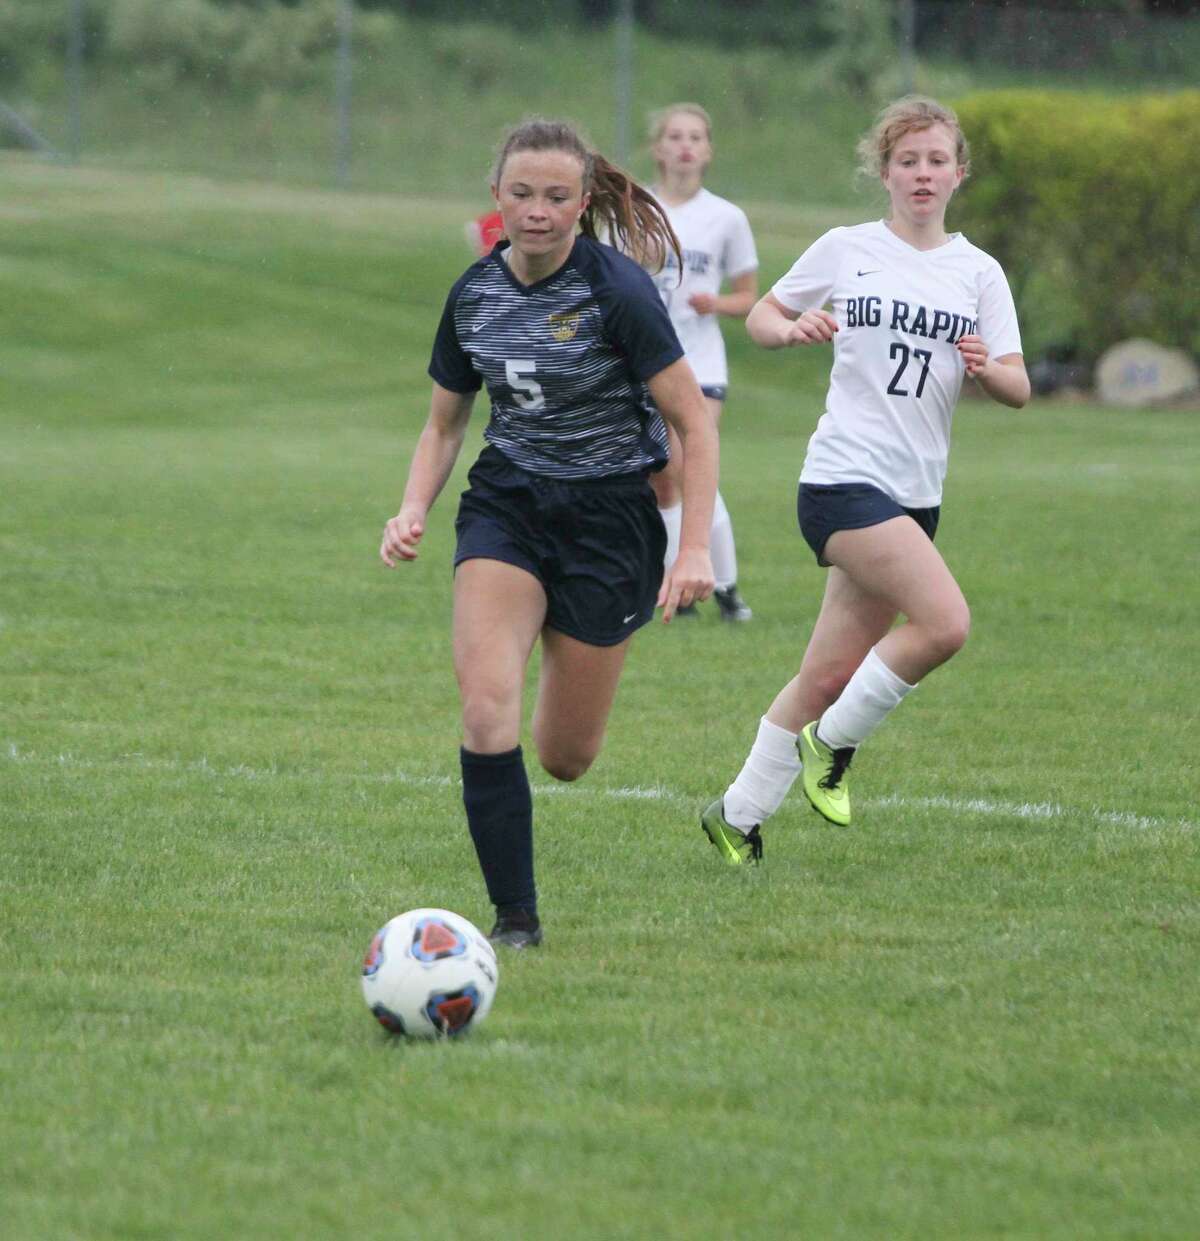 Manistee's Allie Thomas chases down a ball during the Chippewas' district quarterfinal against Big Rapids. (File photo)